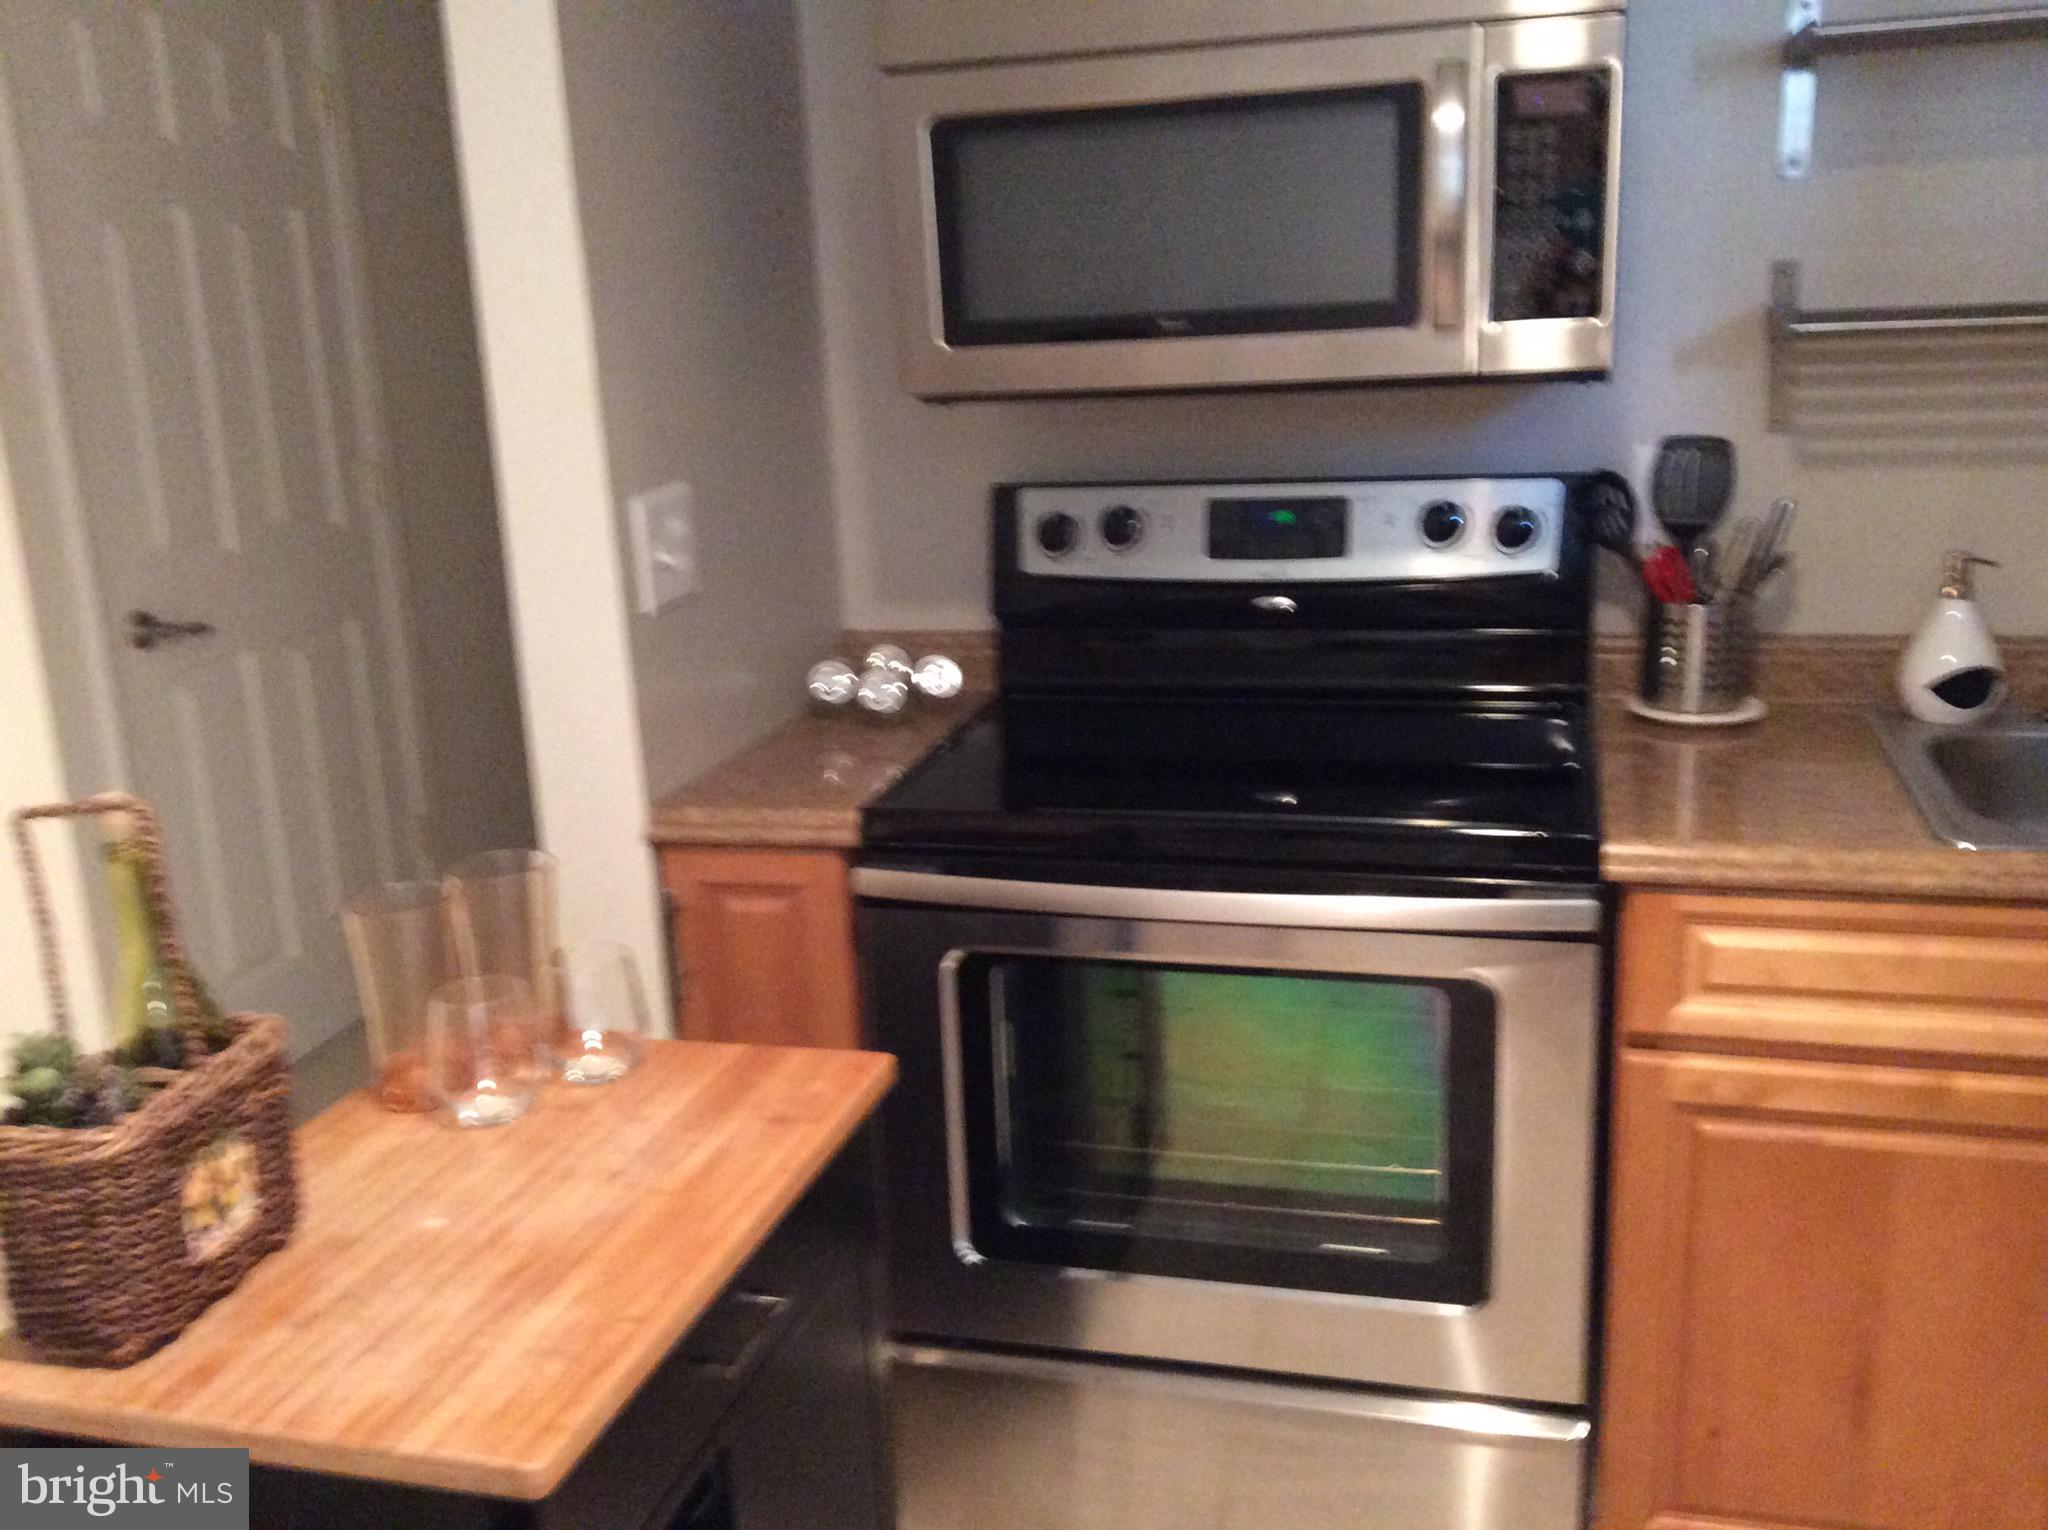 a kitchen with a stove and a microwave